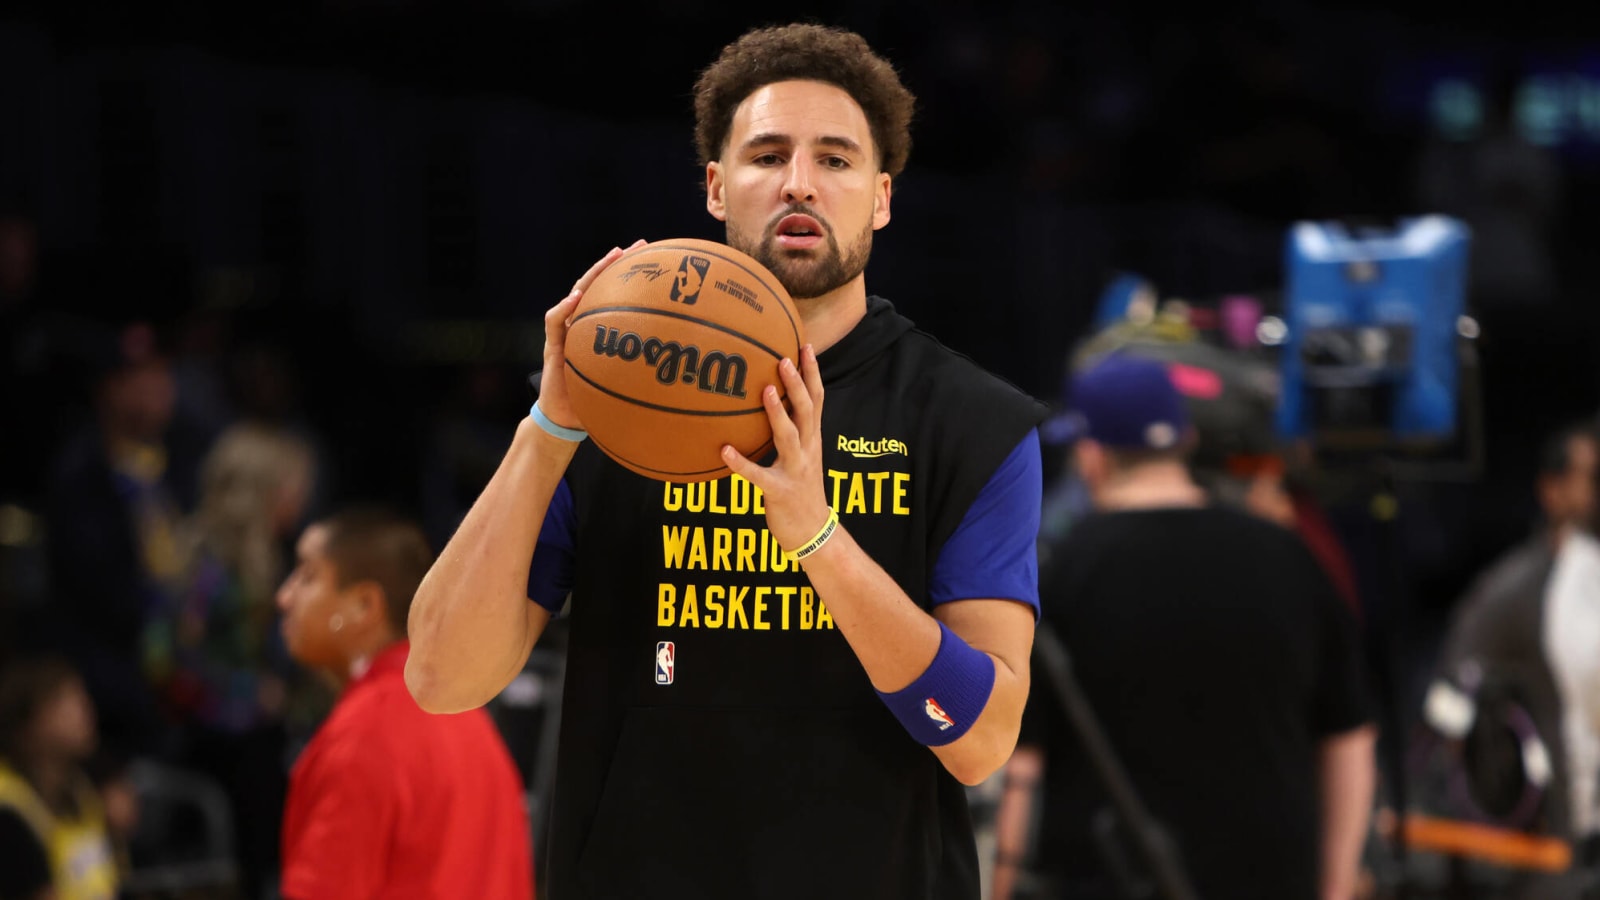 Warriors sharpshooter 'not worried about an extension right now'